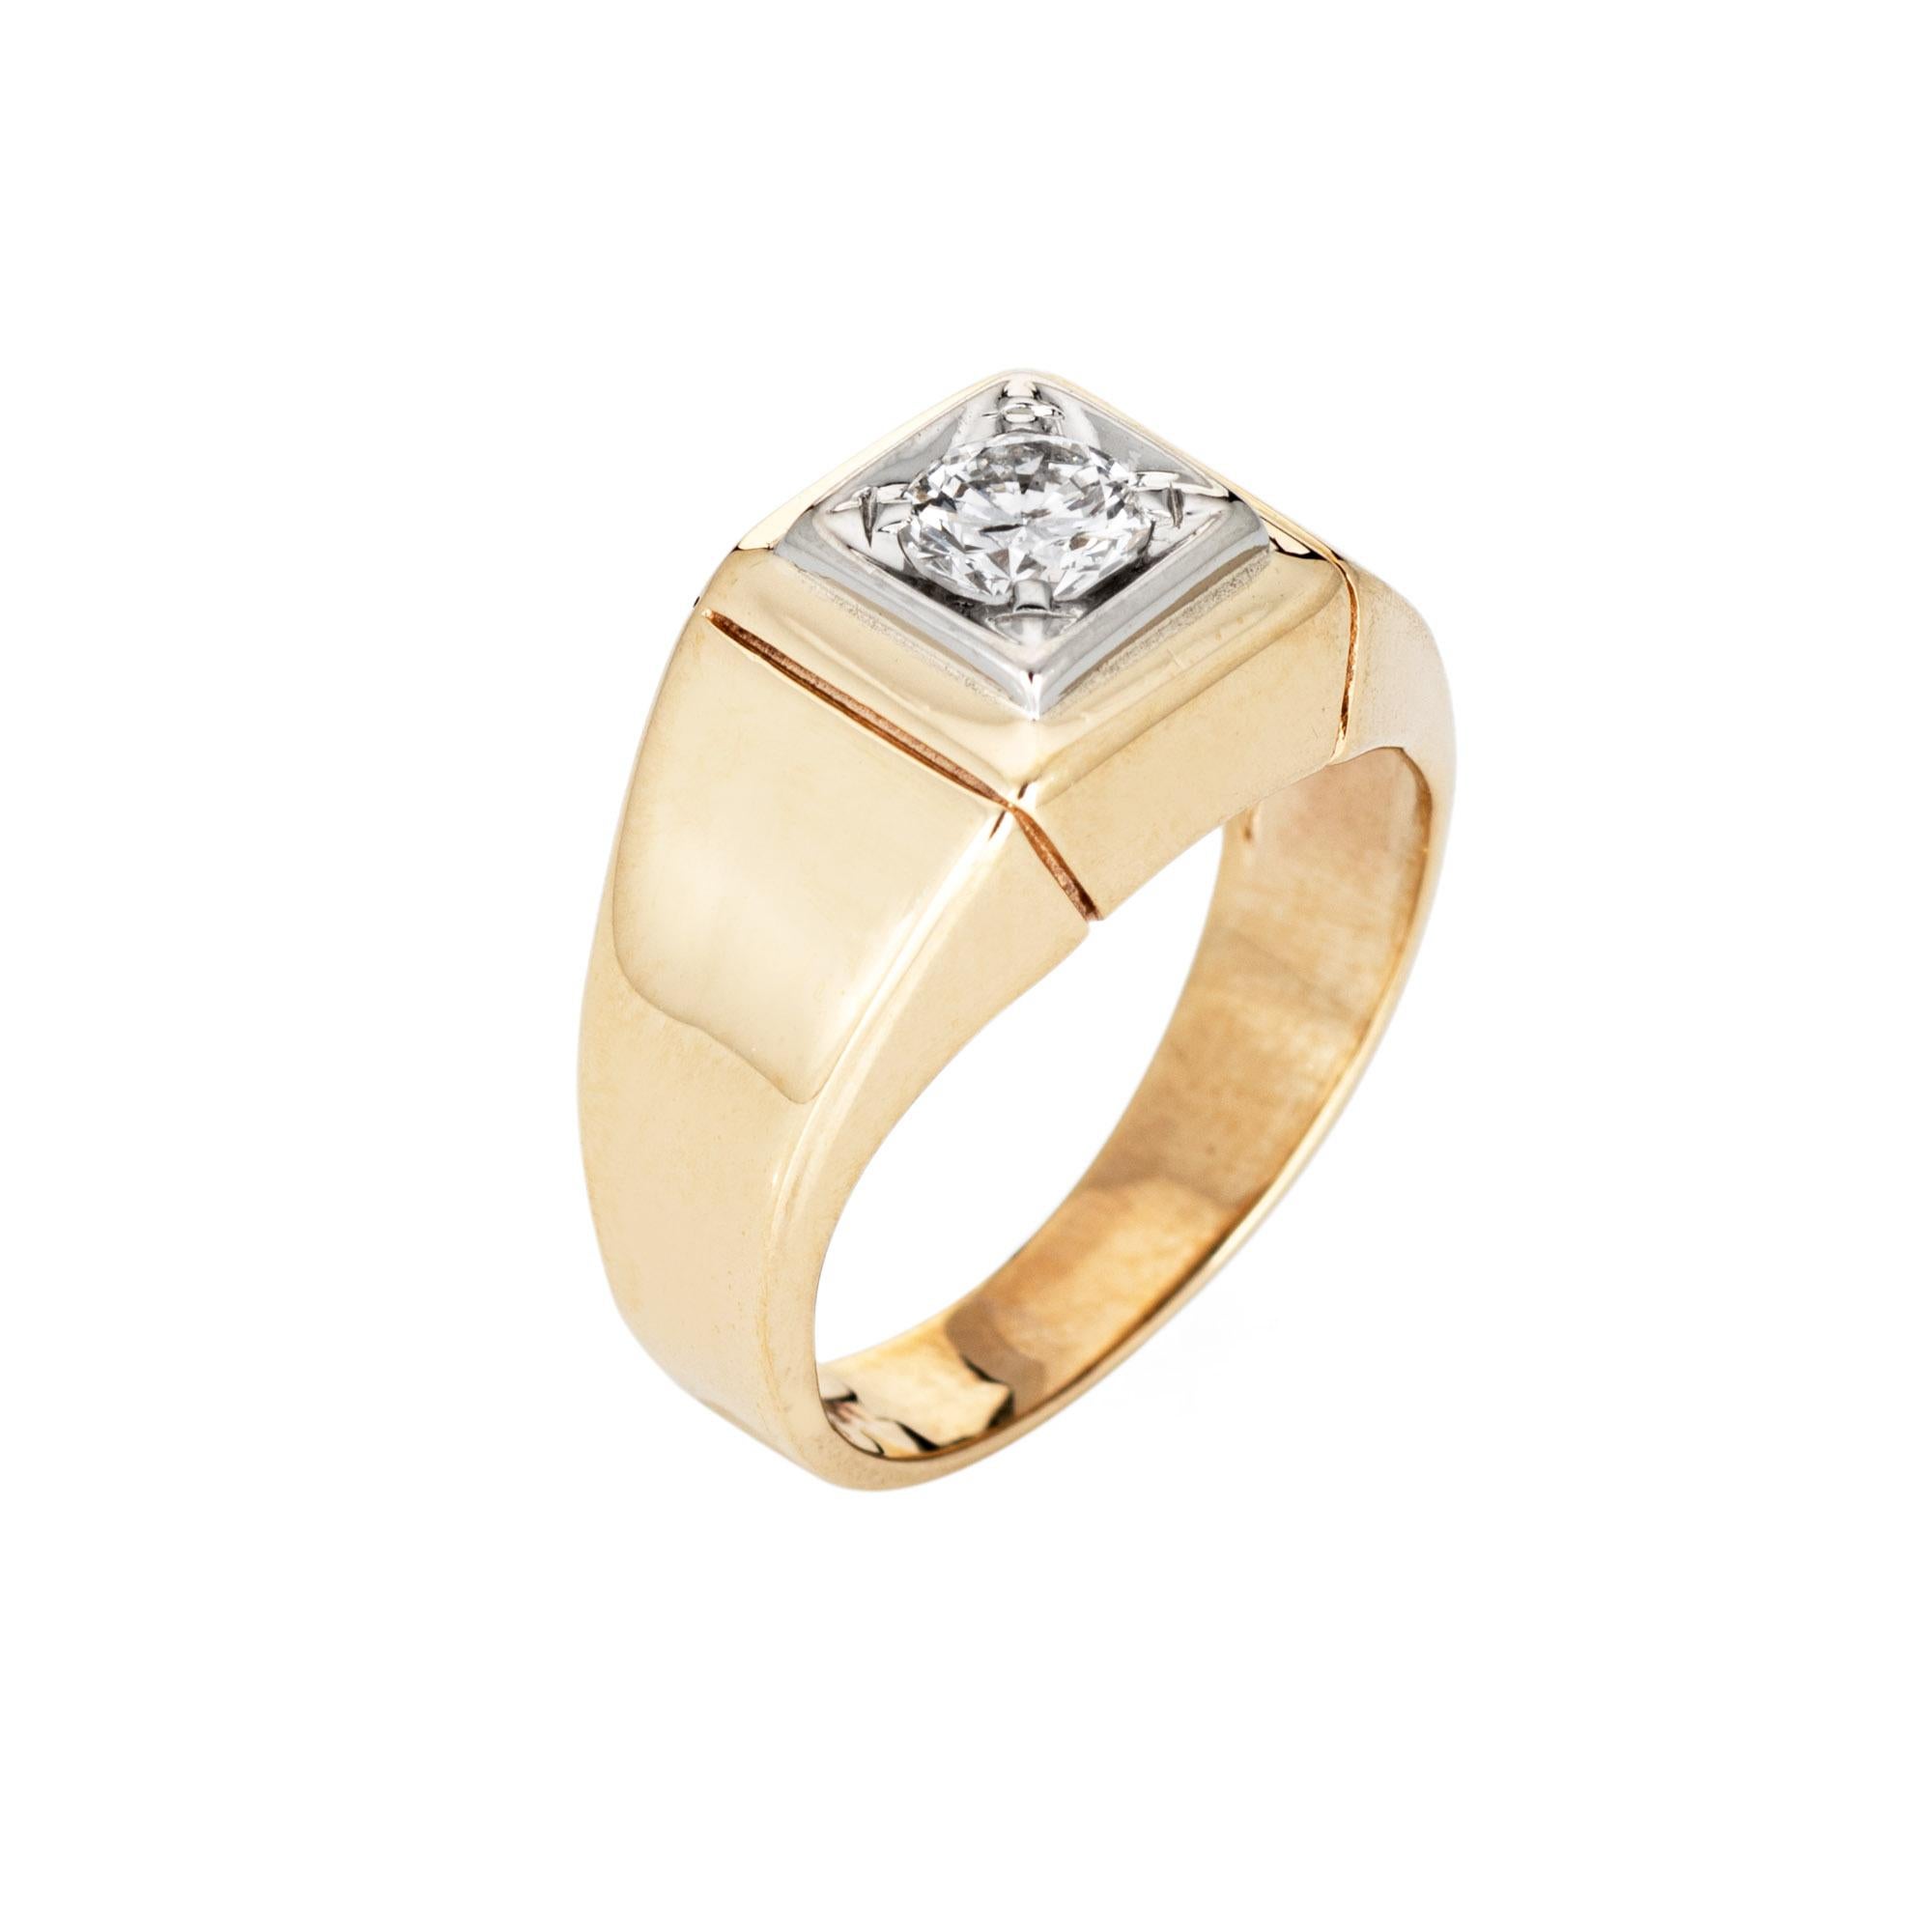 Stylish vintage diamond signet ring (circa 1970s to 1980s) crafted in 10 karat yellow gold. 

Round brilliant cut diamond is estimated at 0.25 carats (estimated at J-K color and SI2 clarity). 

The square signet ring is set with an estimated 1/4